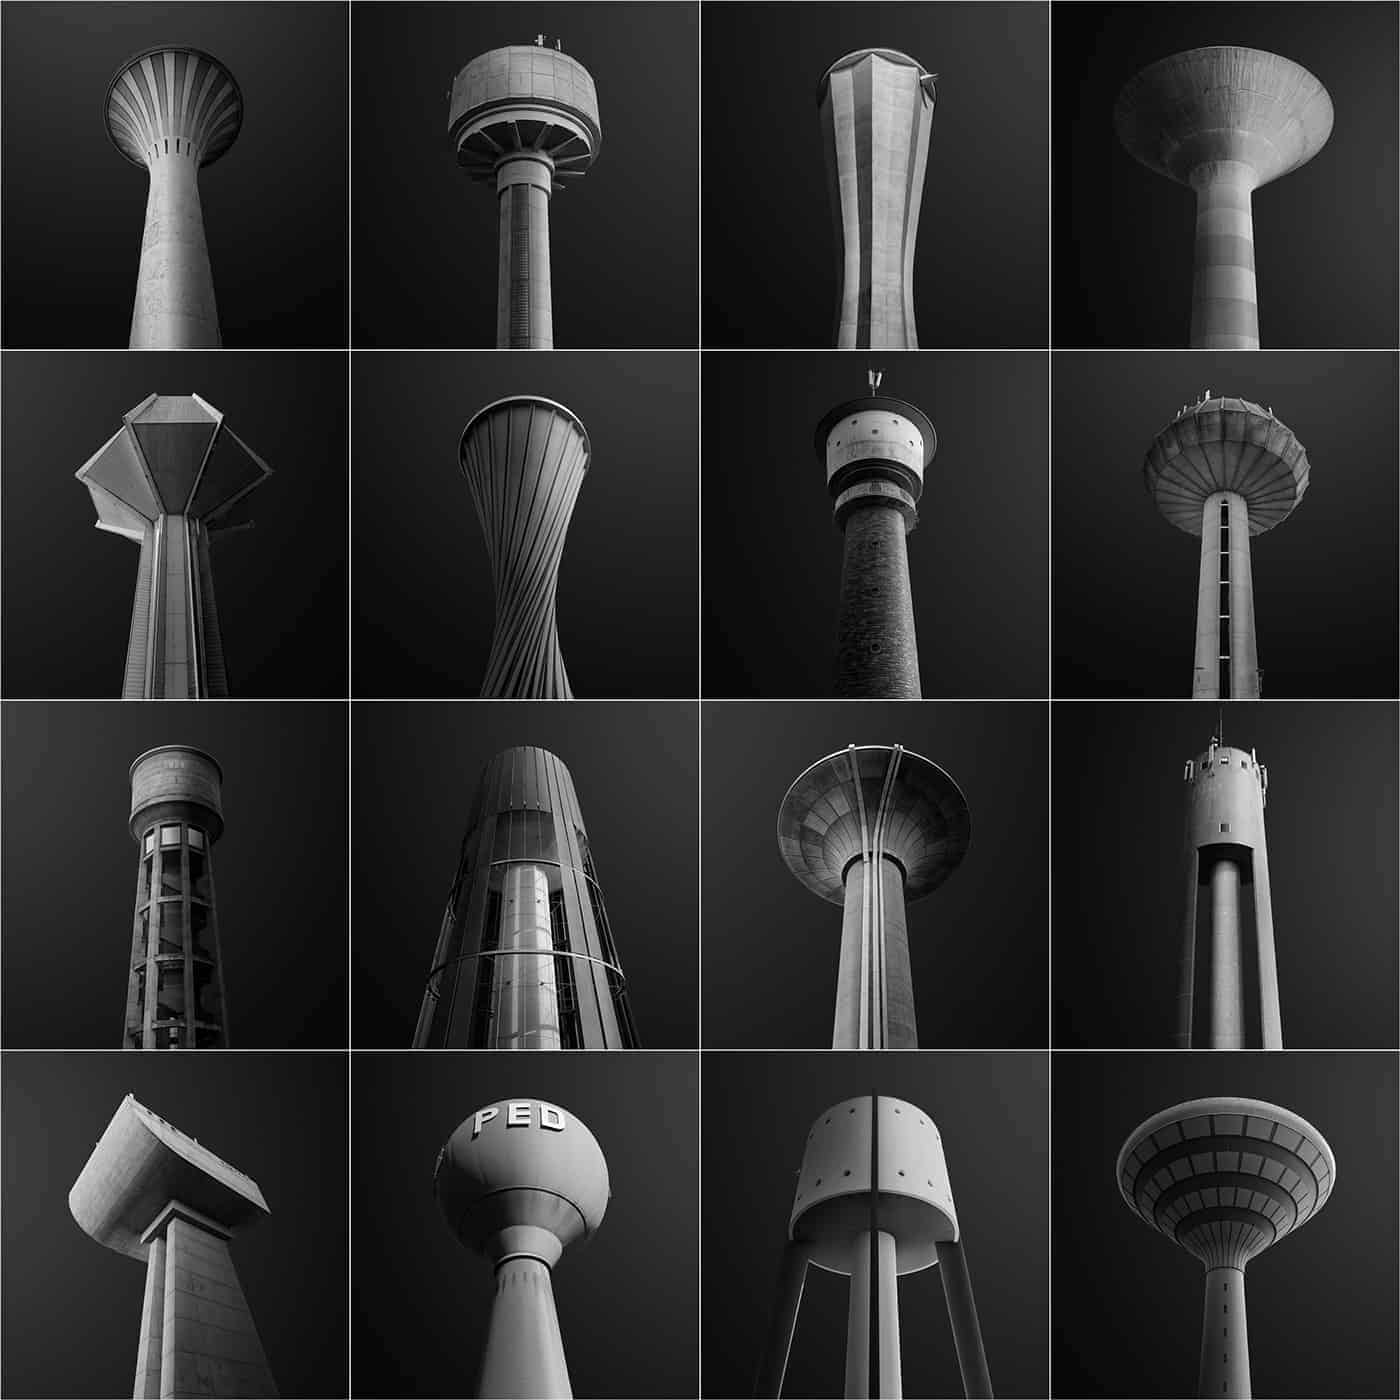 Water Towers Of Luxembourg: A Pictographic Study